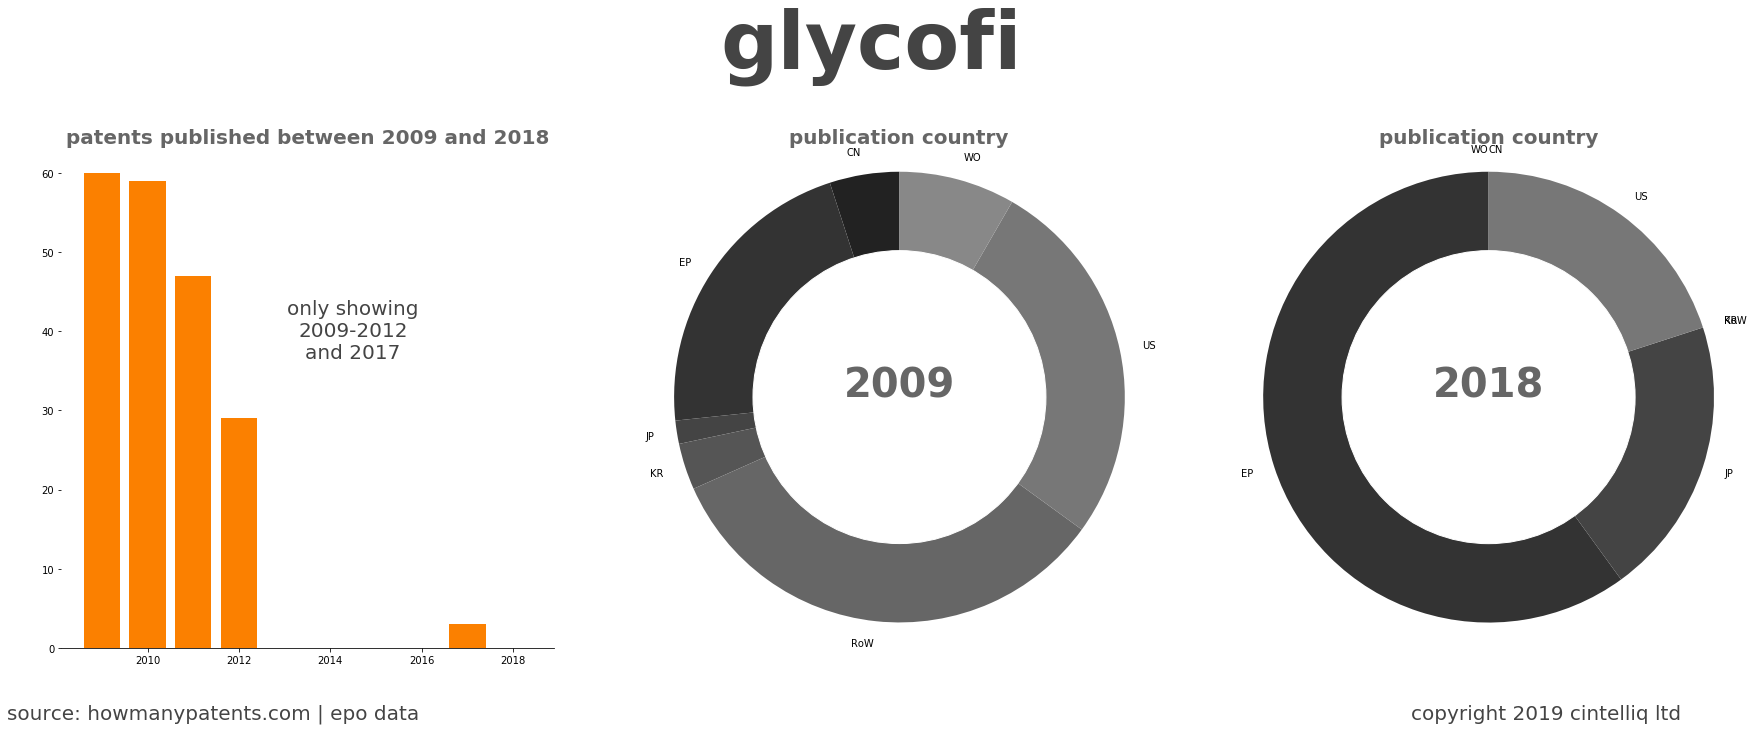 summary of patents for Glycofi